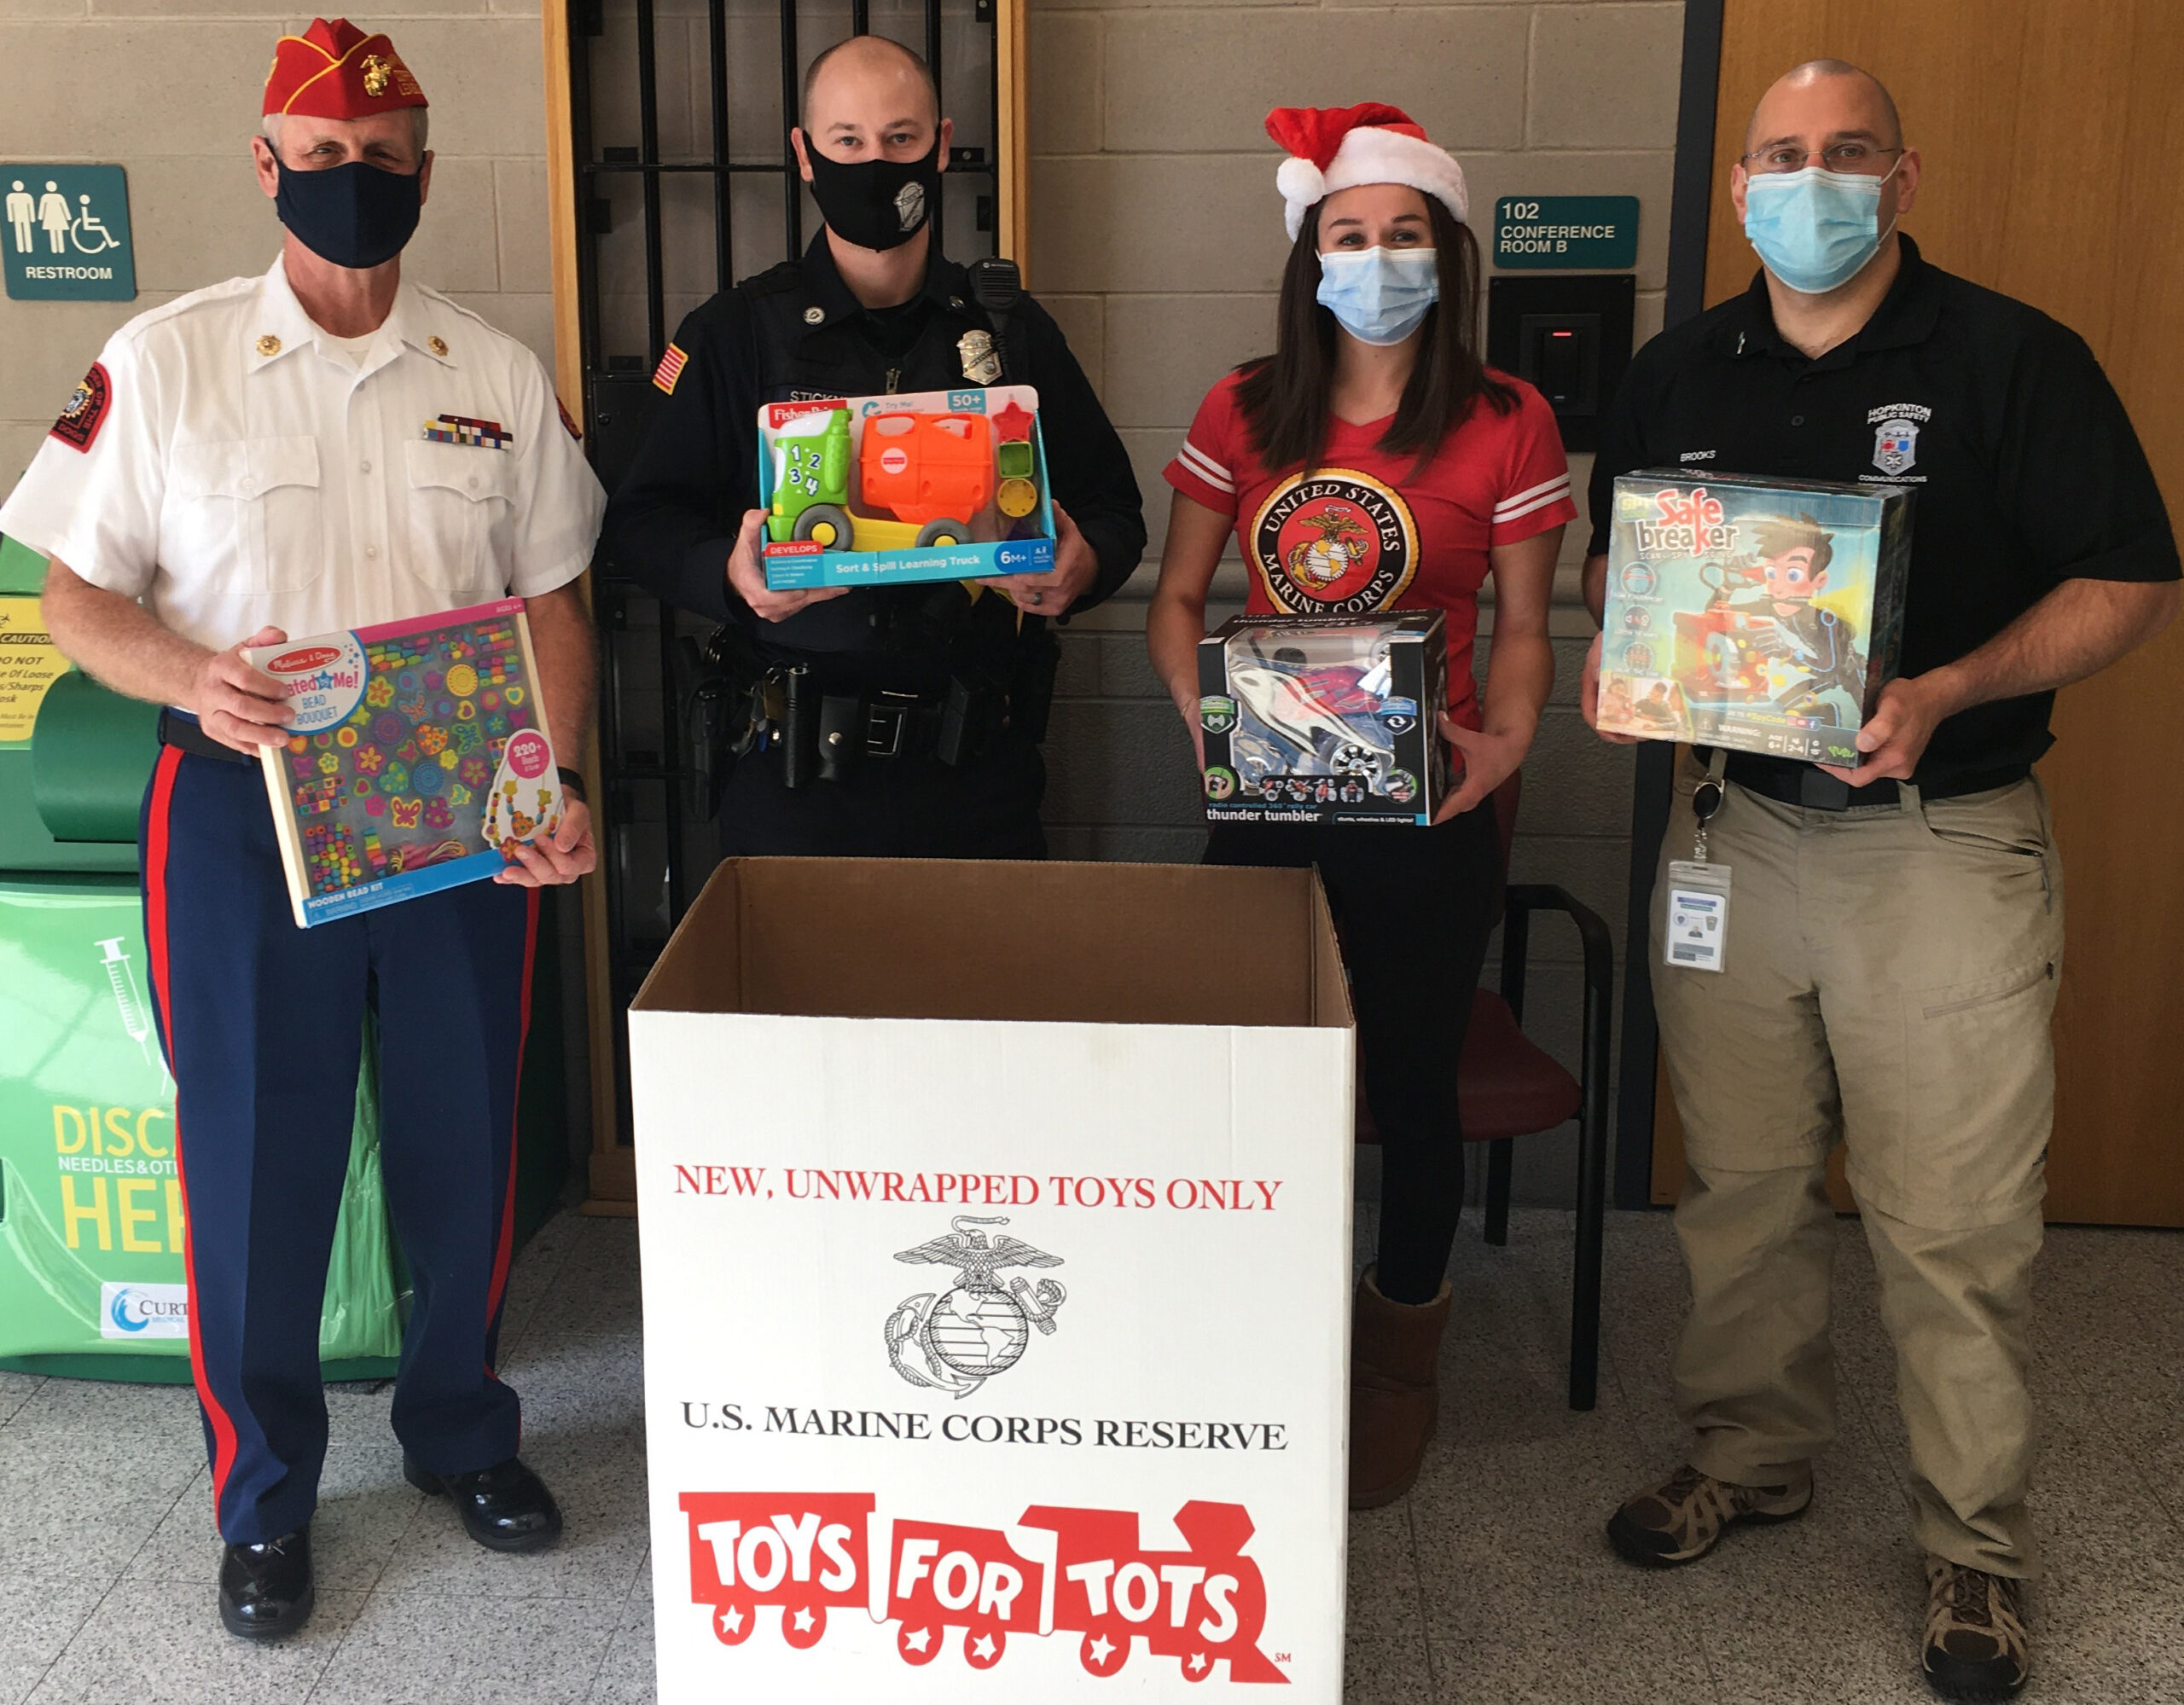 Hopkinton shows generosity in Toys For Tots donations; collections close Friday